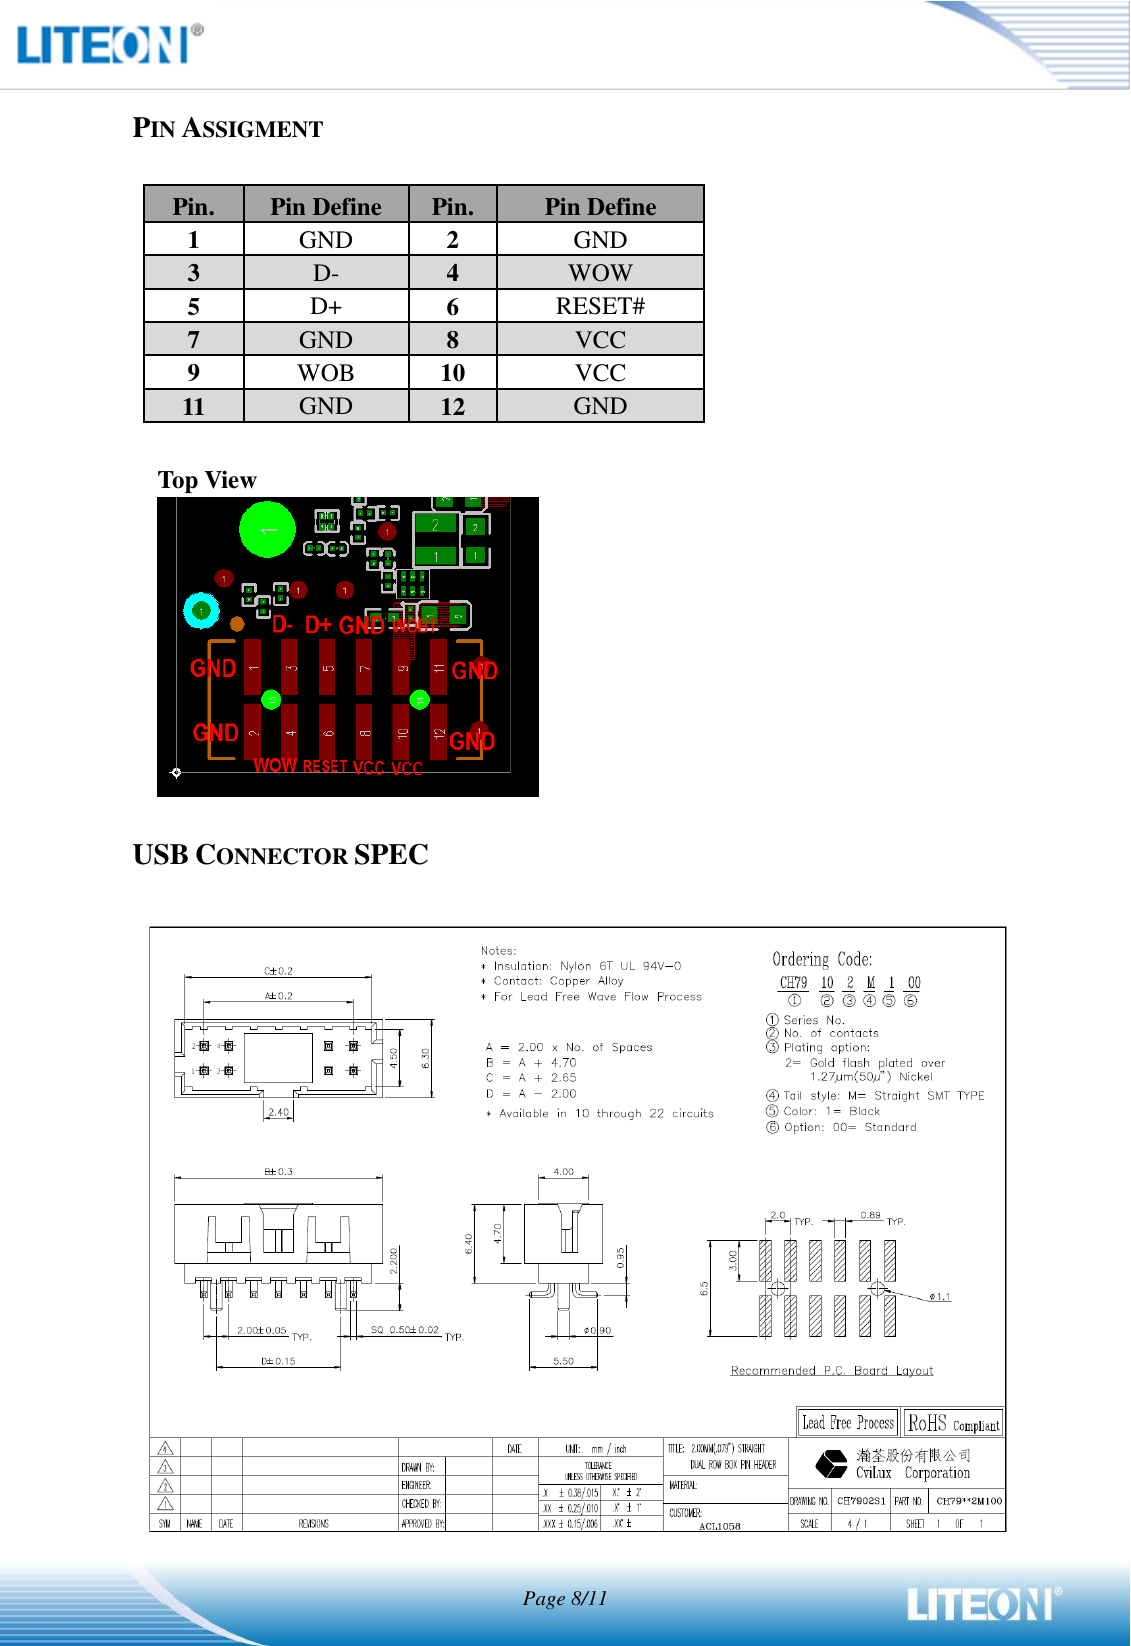  Page 8/11   PIN ASSIGMENT  Pin. Pin Define Pin. Pin Define 1 GND 2 GND 3 D- 4 WOW 5 D+ 6 RESET#   7 GND 8 VCC 9 WOB 10 VCC 11 GND 12 GND  Top View   USB CONNECTOR SPEC    